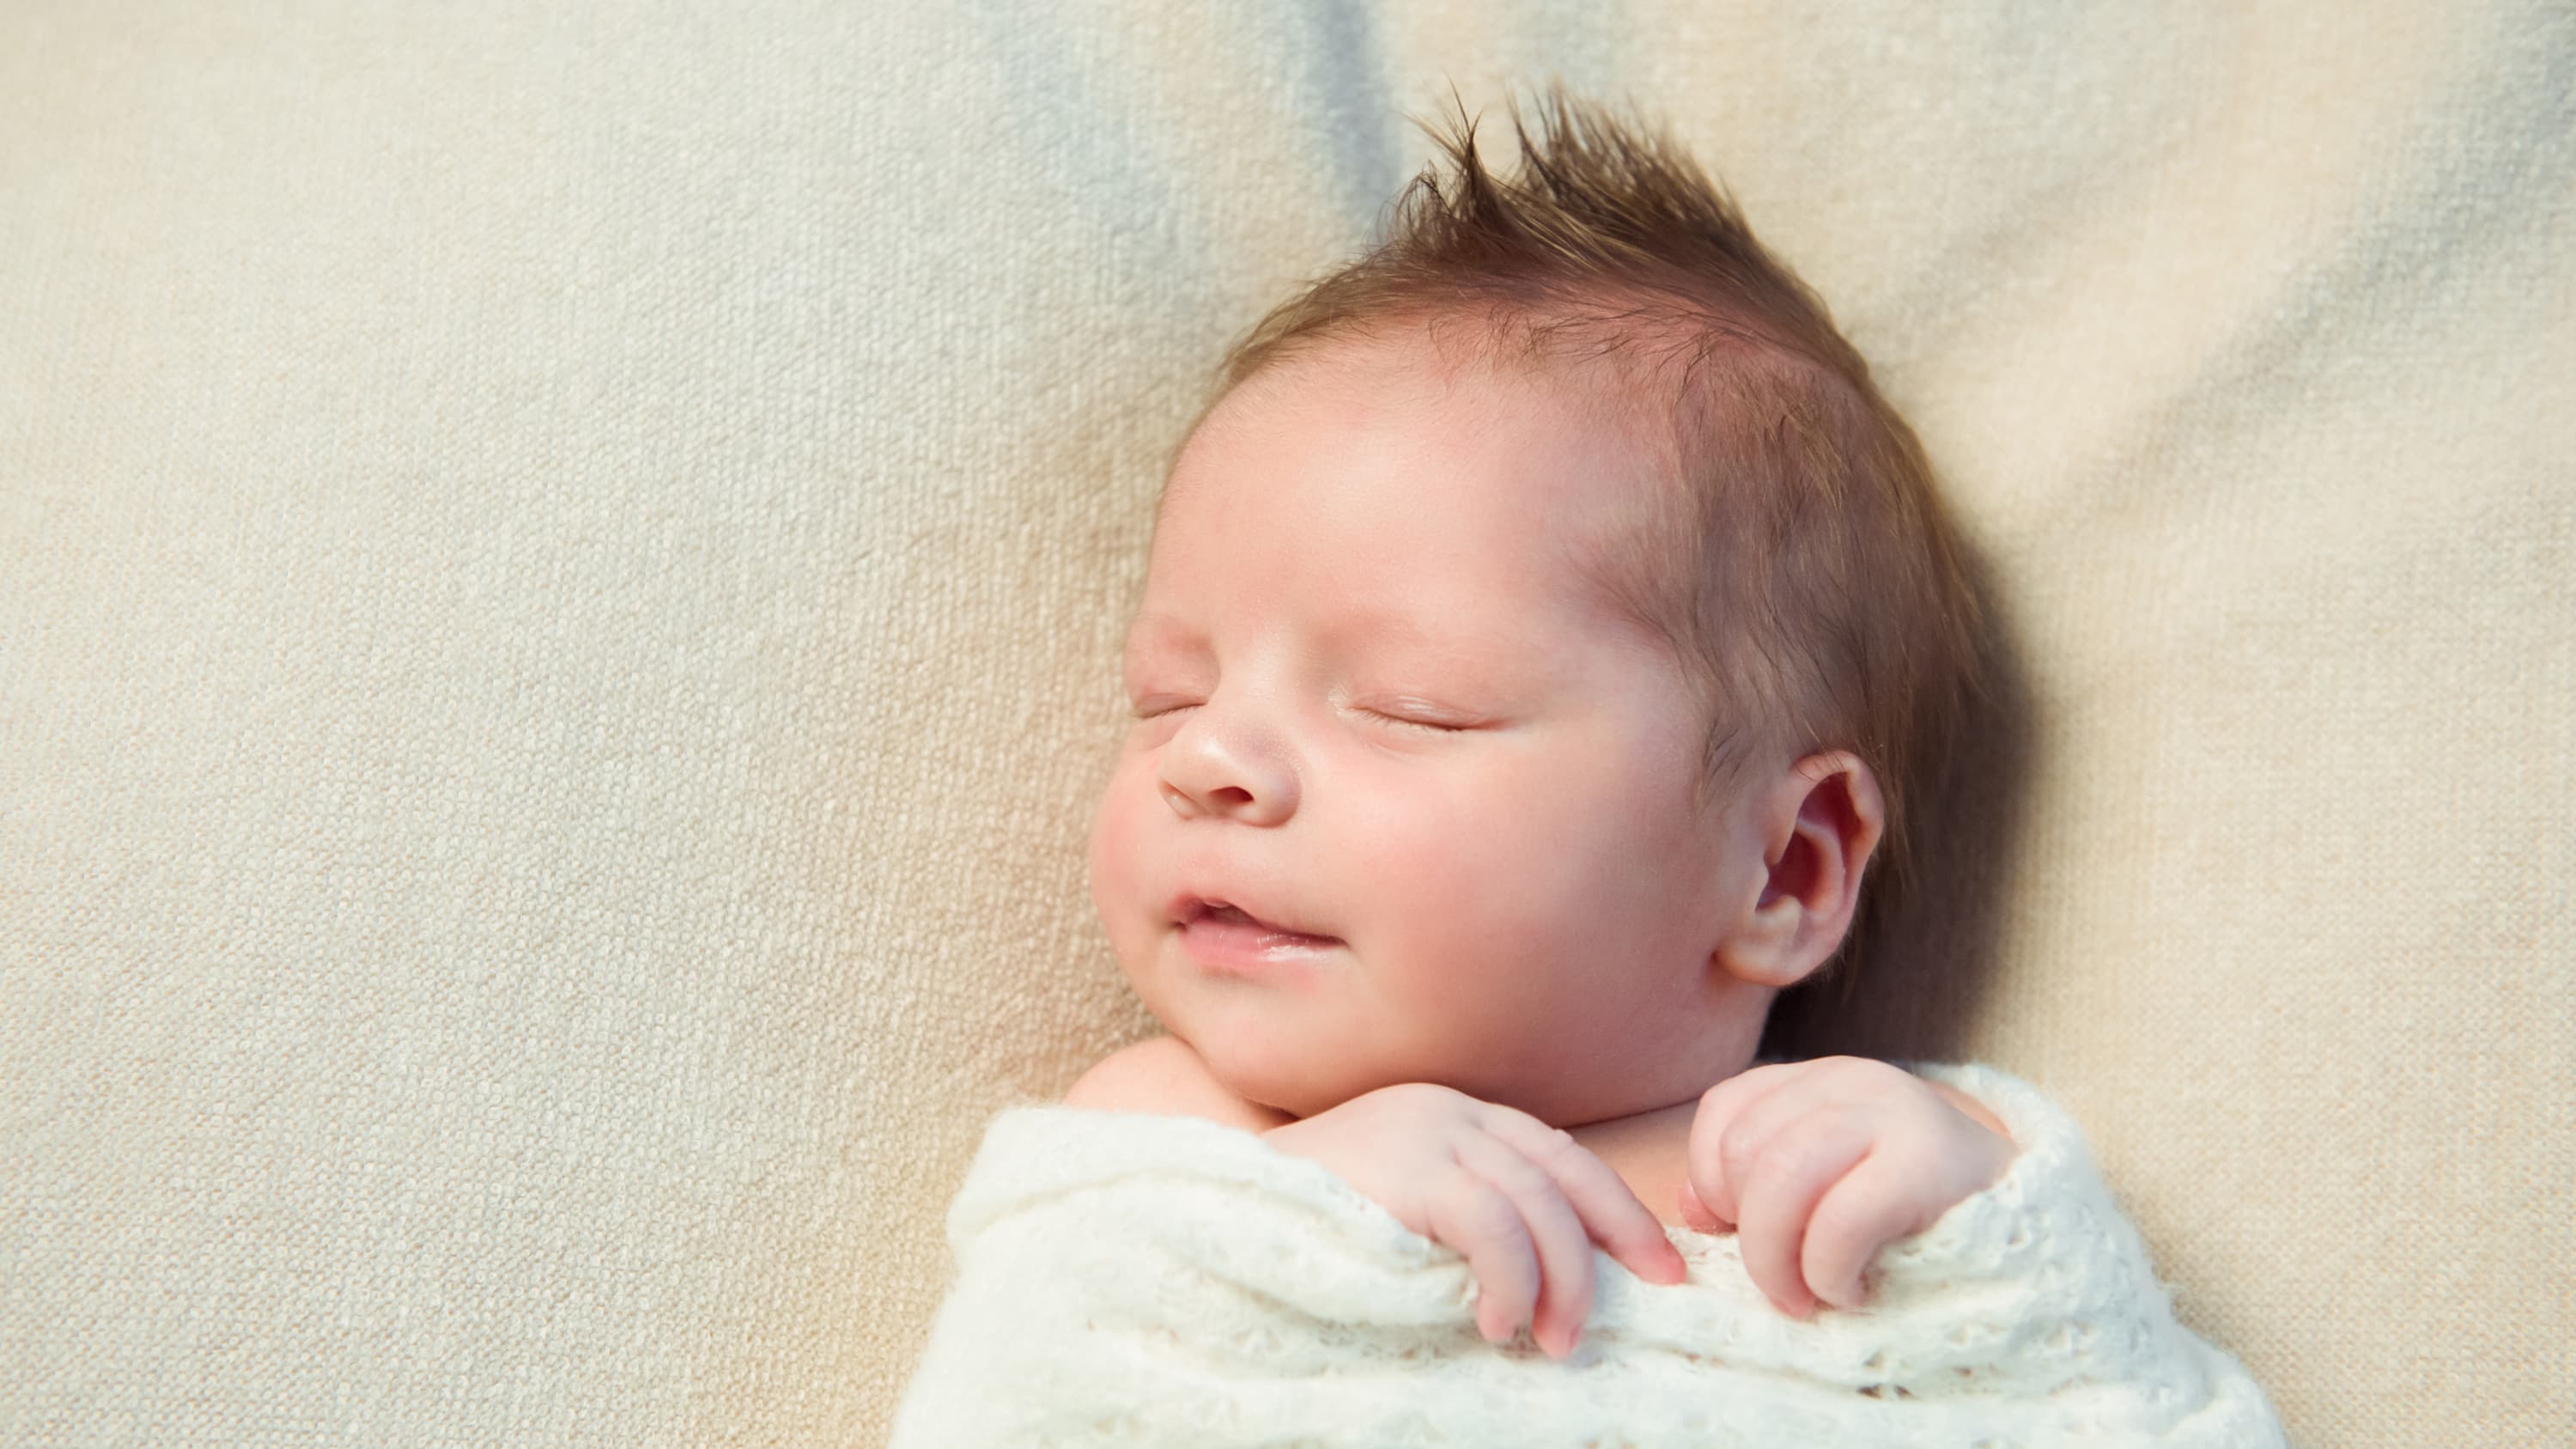 a newborn, possibly conceived through methods for transgender individuals, sleeps.